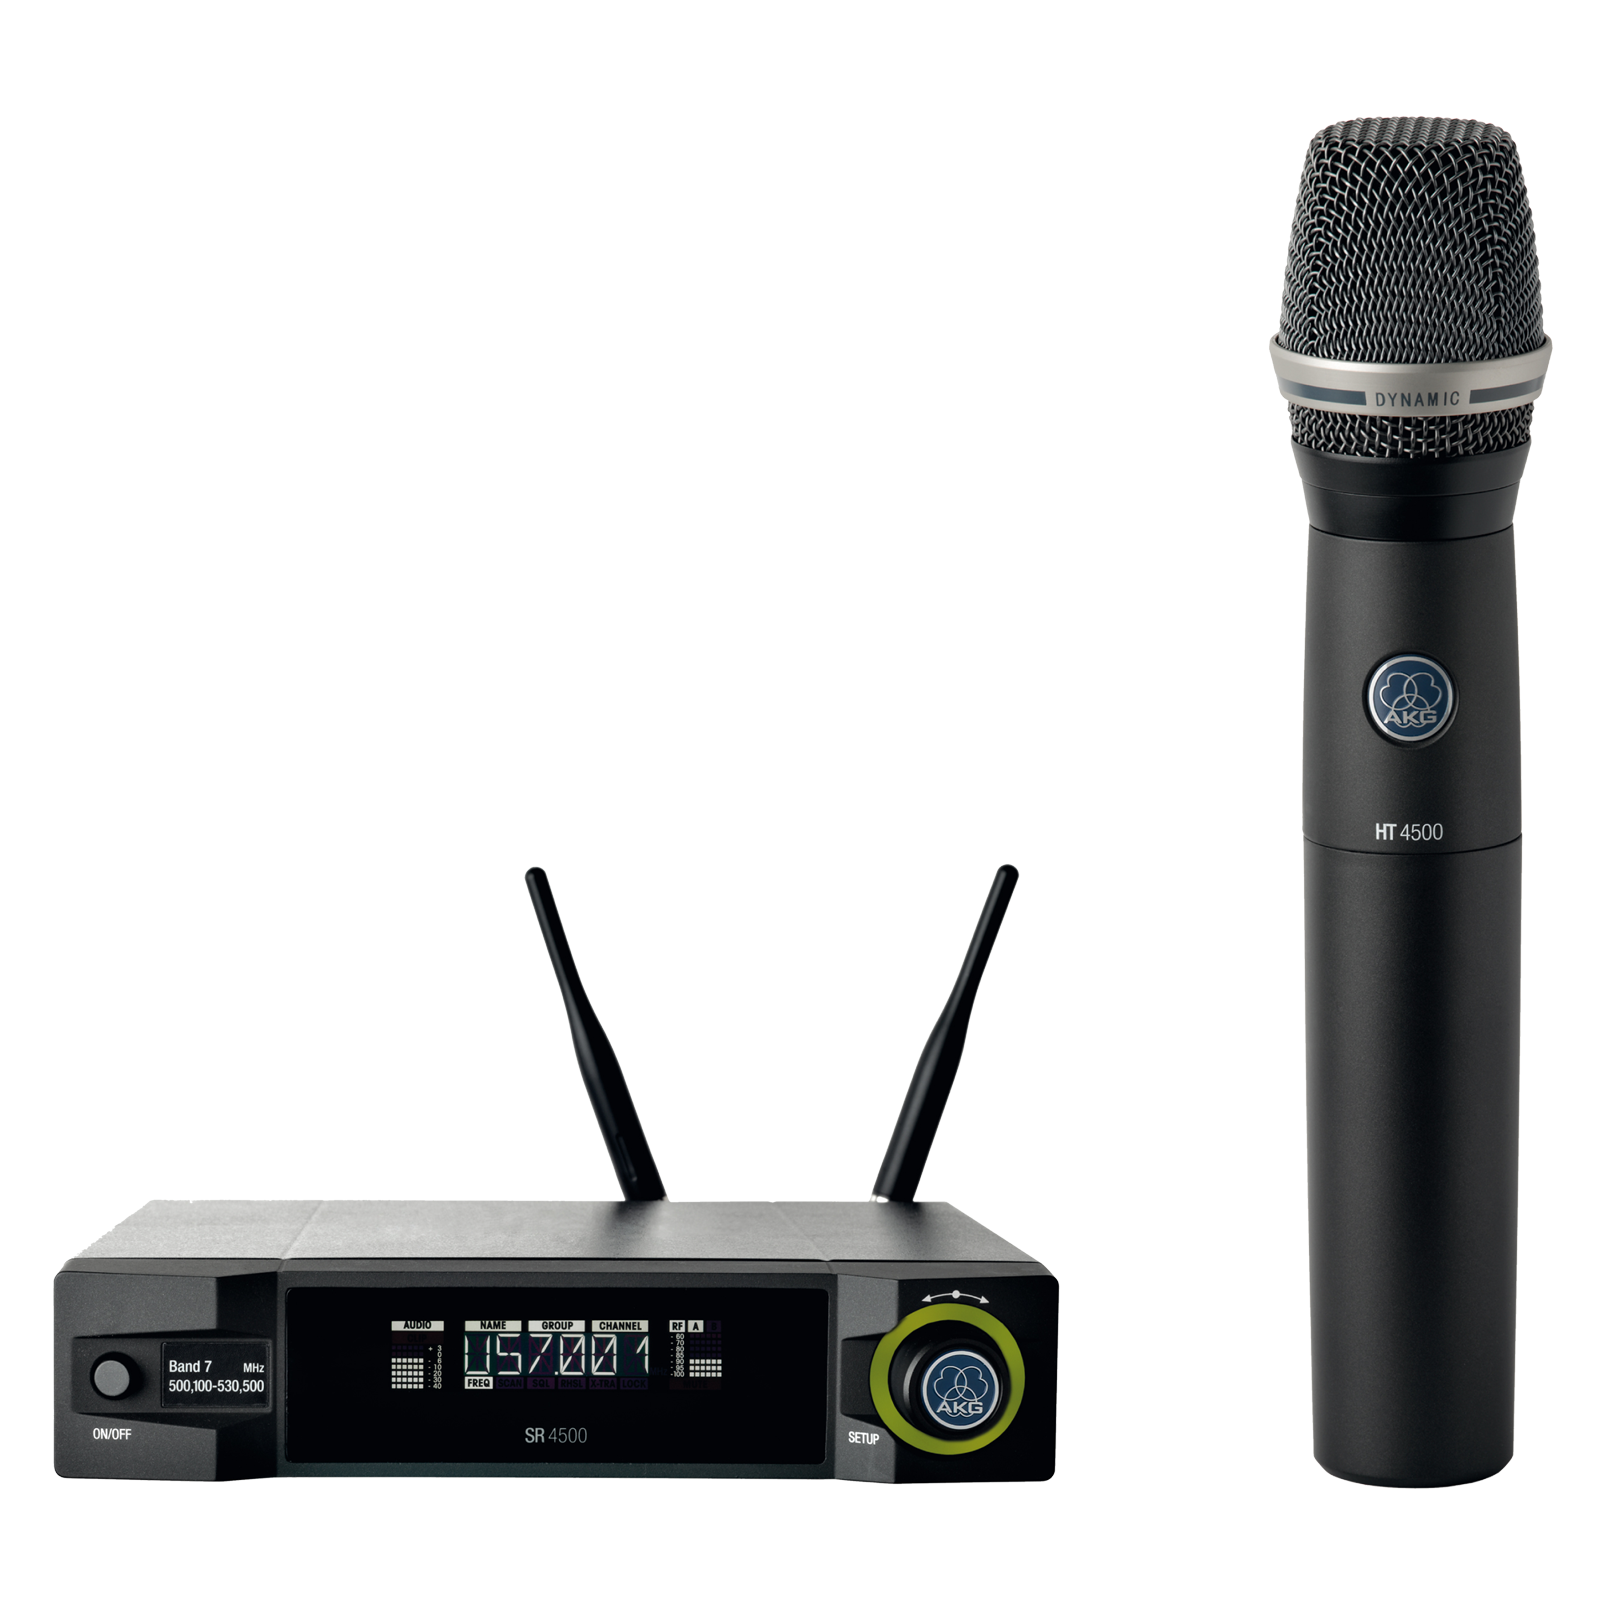 WMS4500 D7 Set - Black - Reference wireless microphone system - Hero